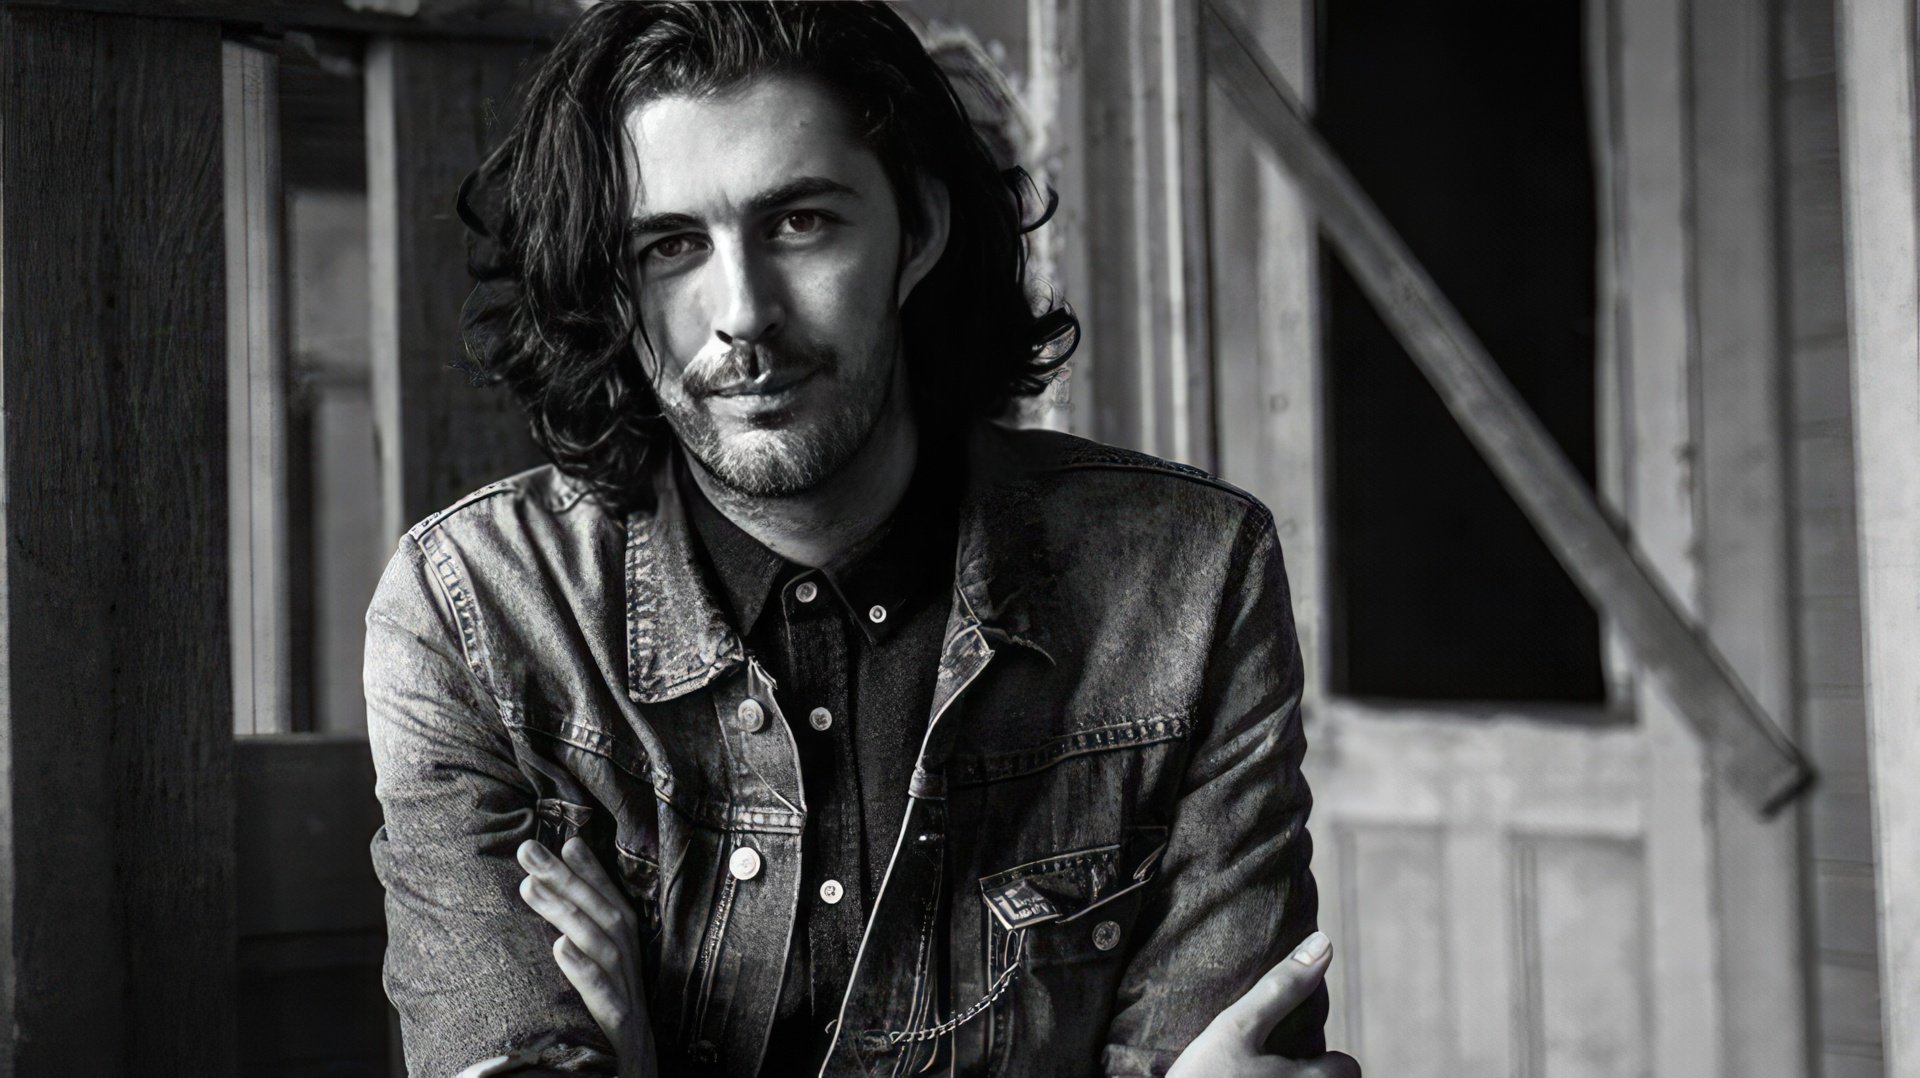 Hozier is a talented musician